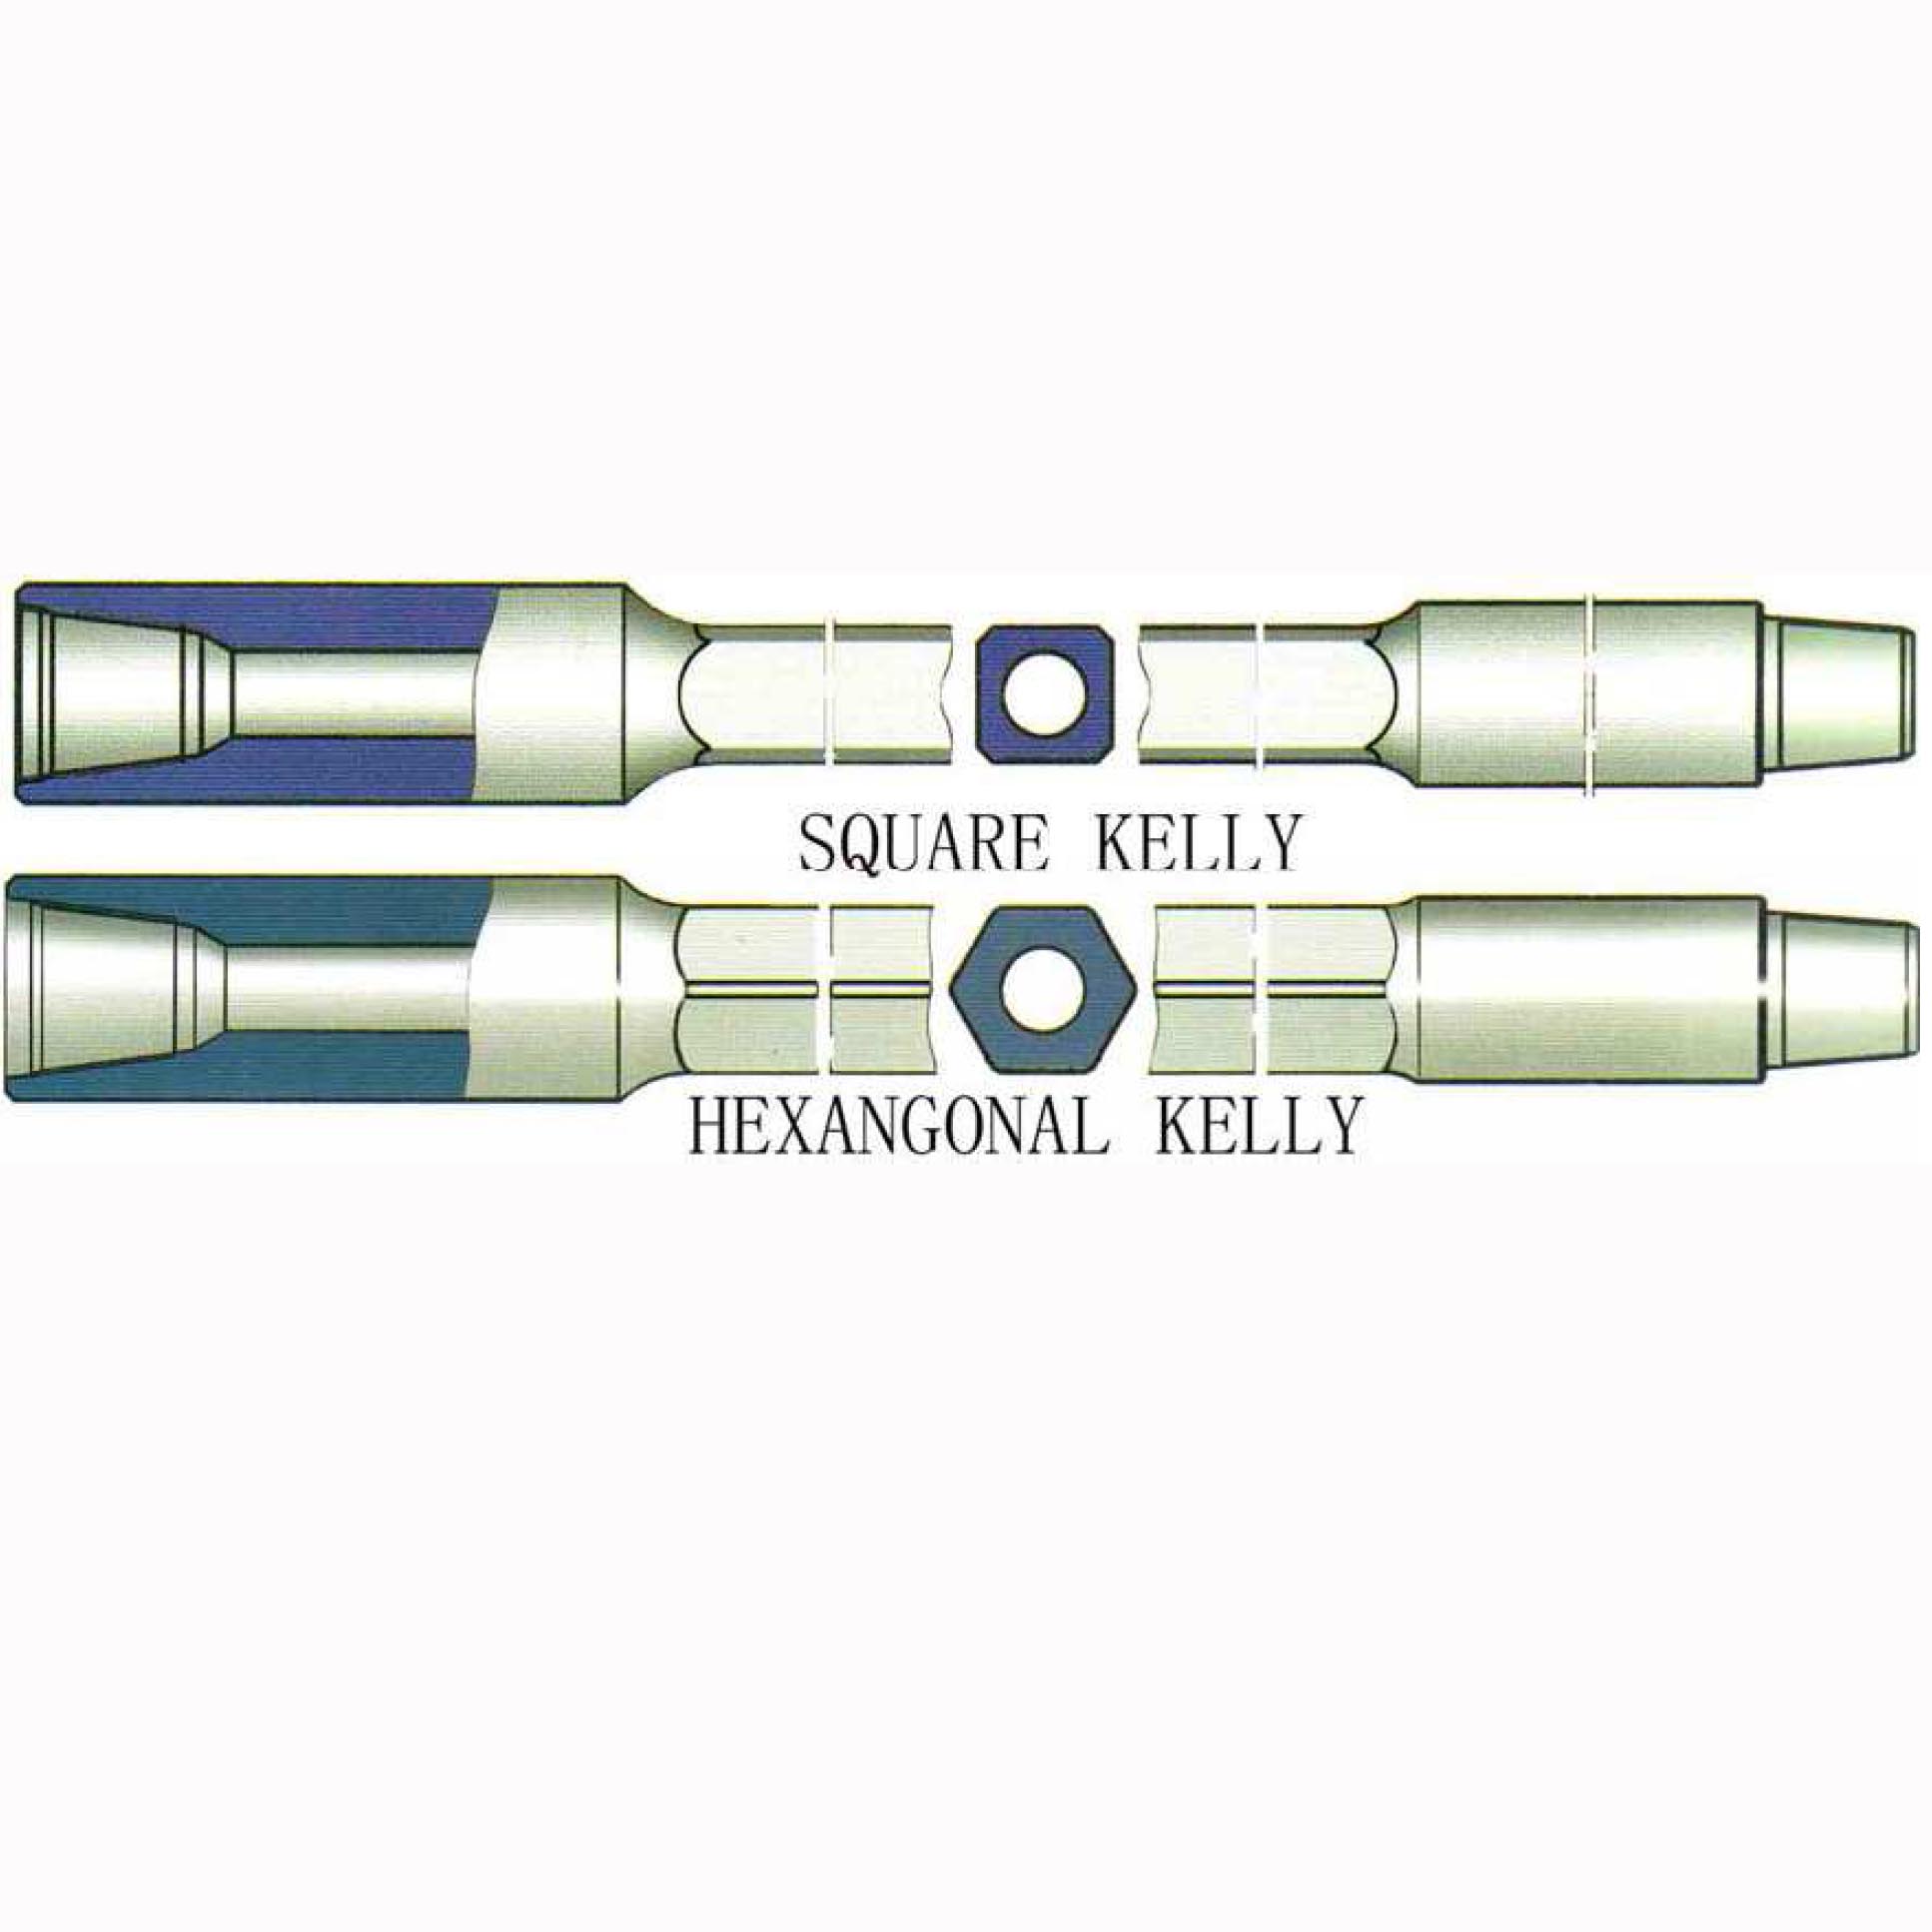 KELLY ( SQUARE AND HEXAGONAL)